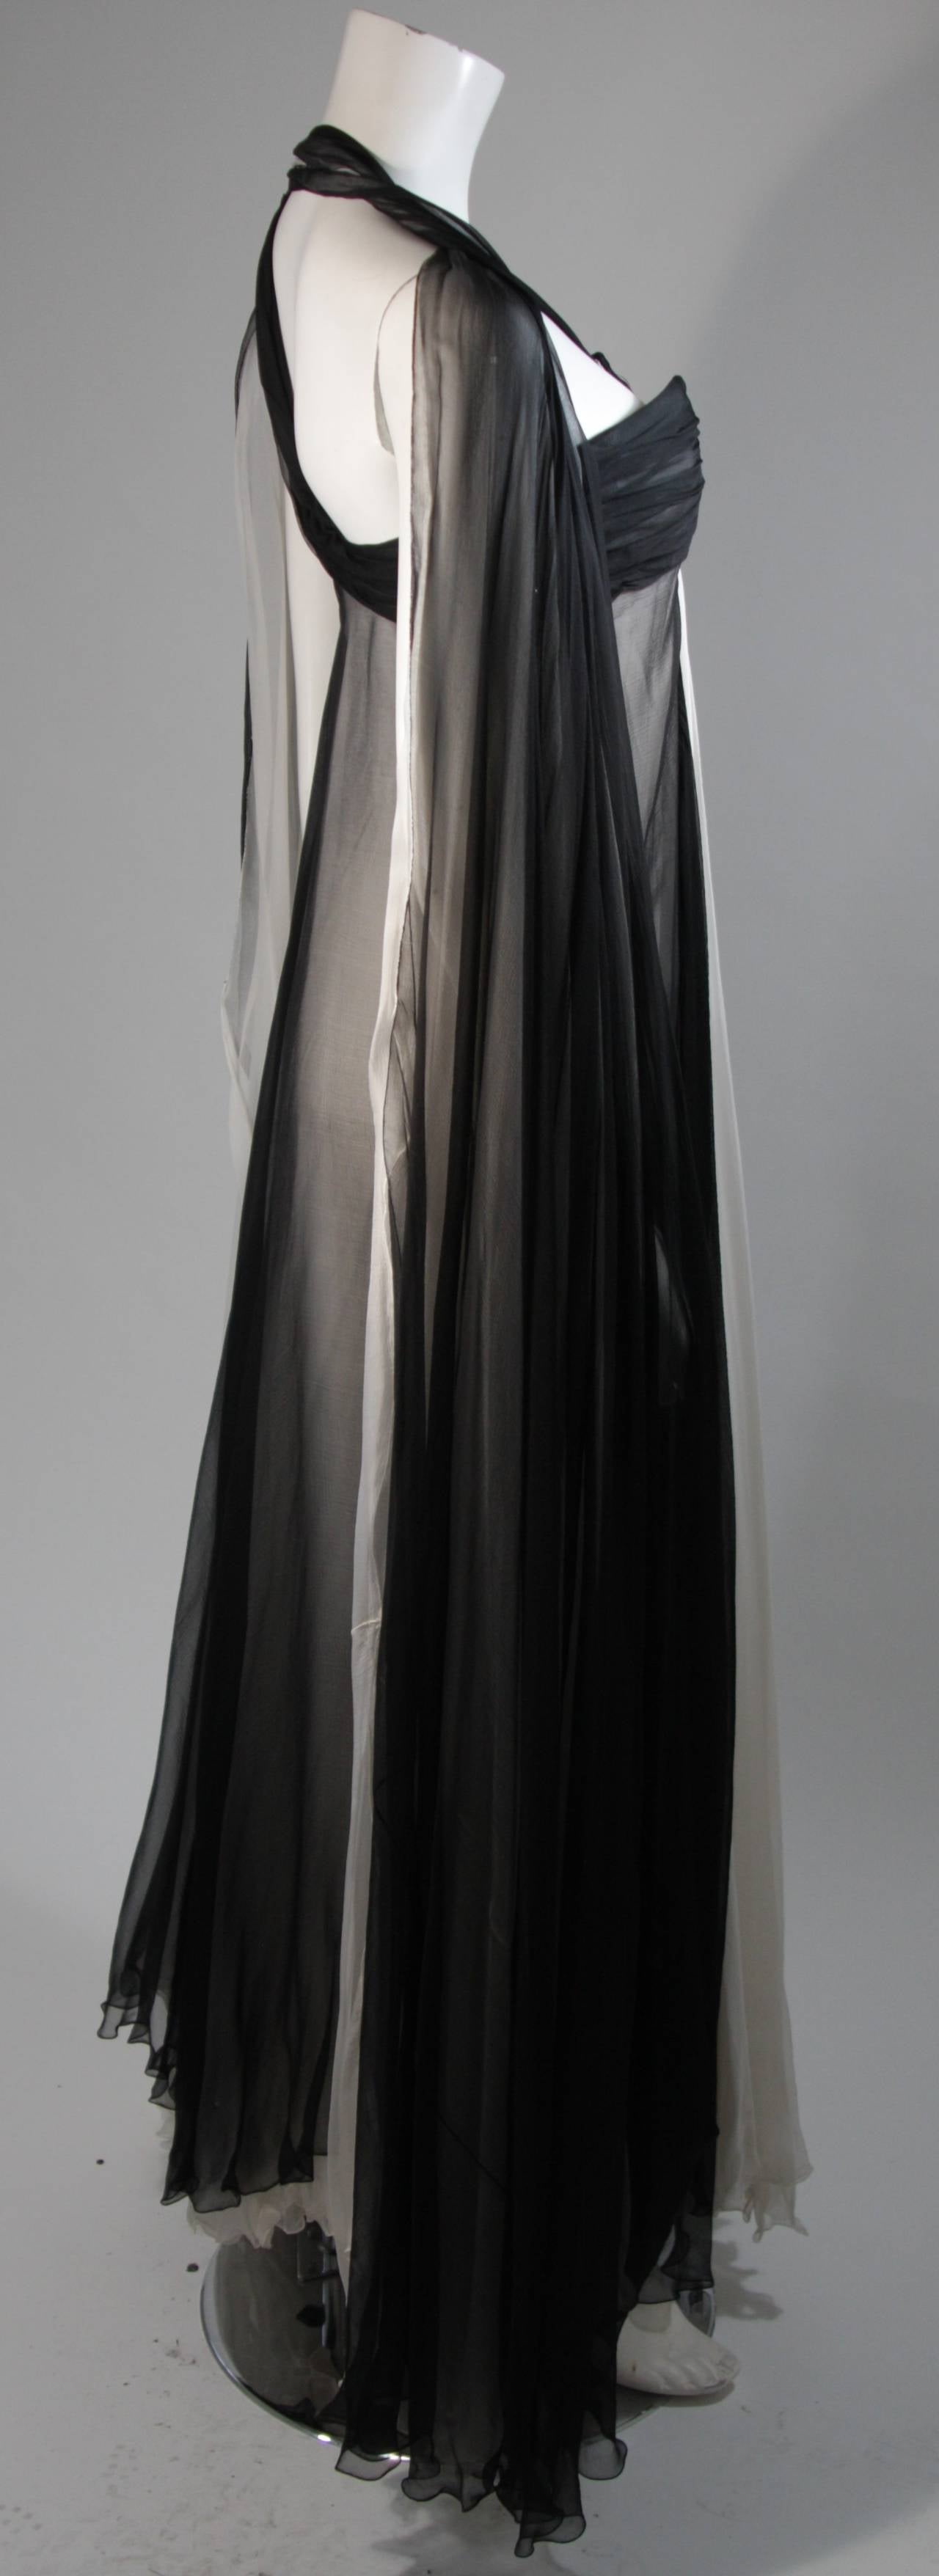 Jacqueline De Ribes Black and Ivory Silk Chiffon Gown Size For Sale 2